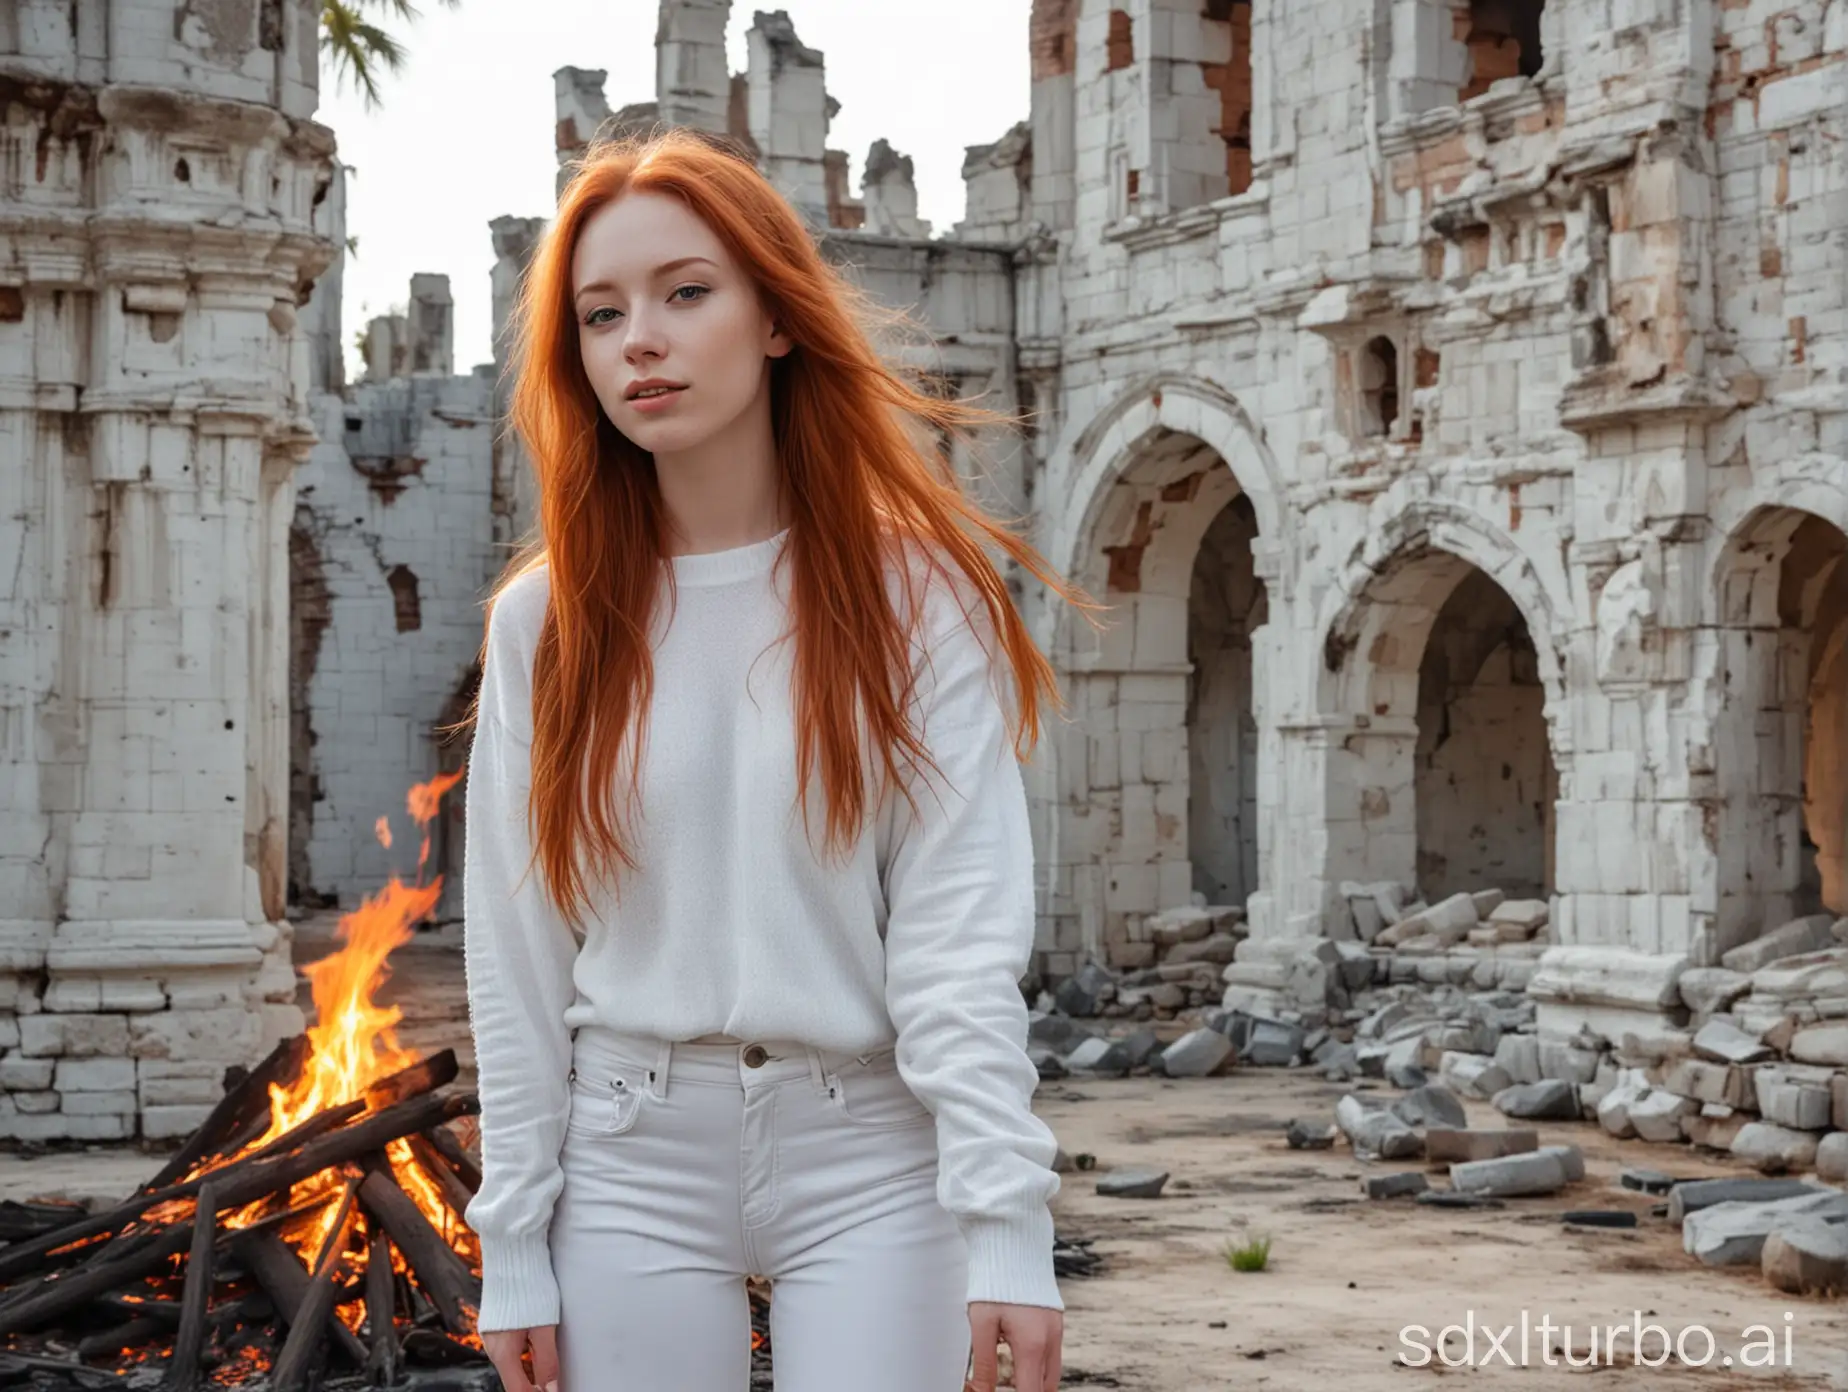 Beautiful red-haired girl with very pale skin in white pants and a white sweater, set against gray castle ruins and palm trees on fire, with a bright blue sky in the background